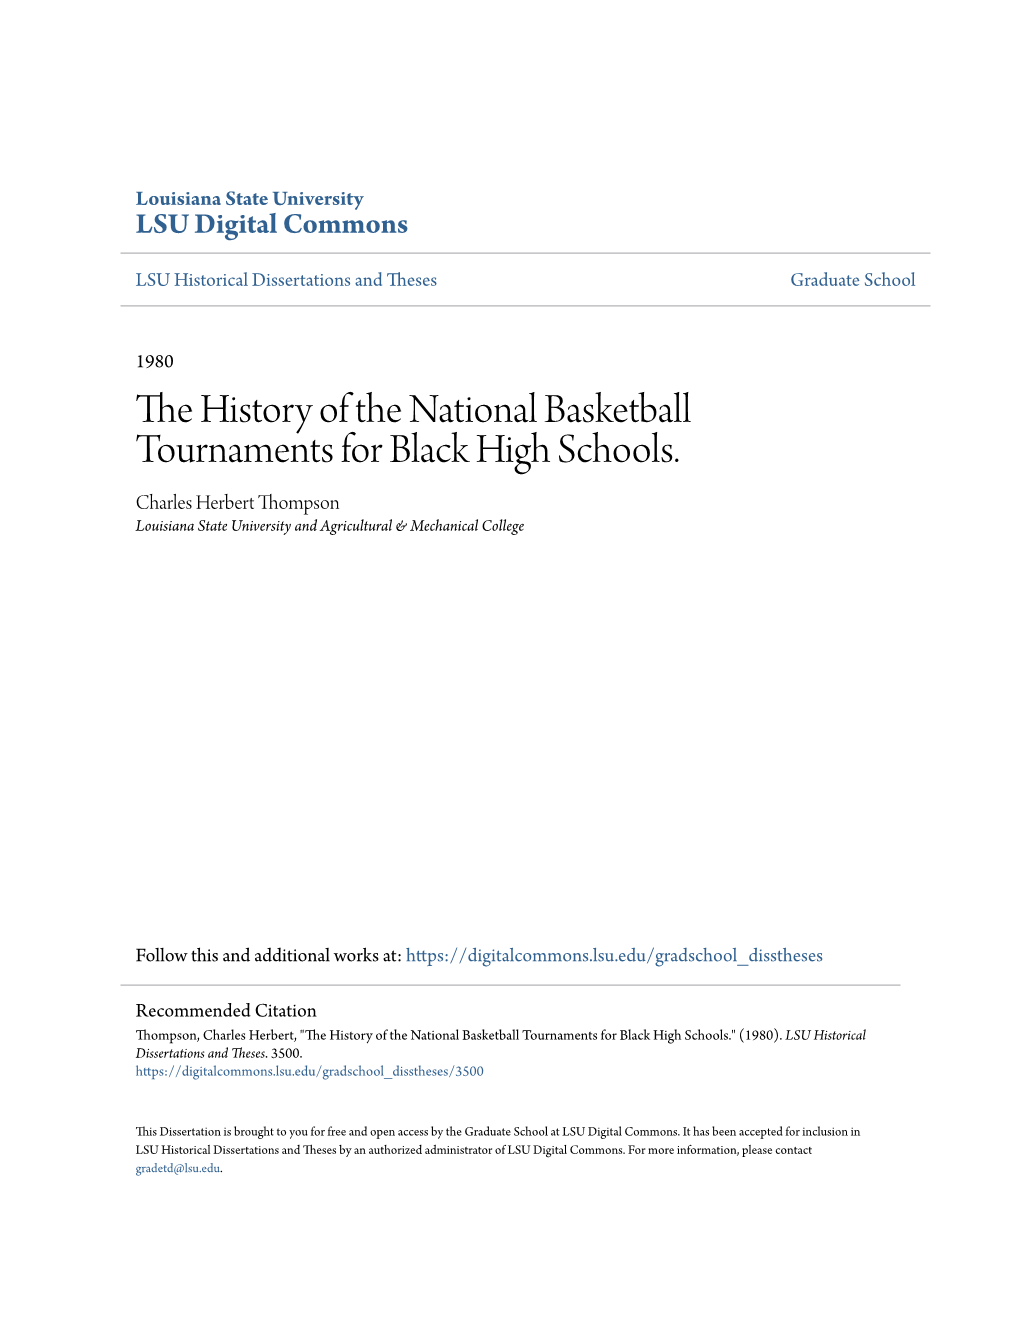 The History of the National Basketball Tournaments for Black High Schools